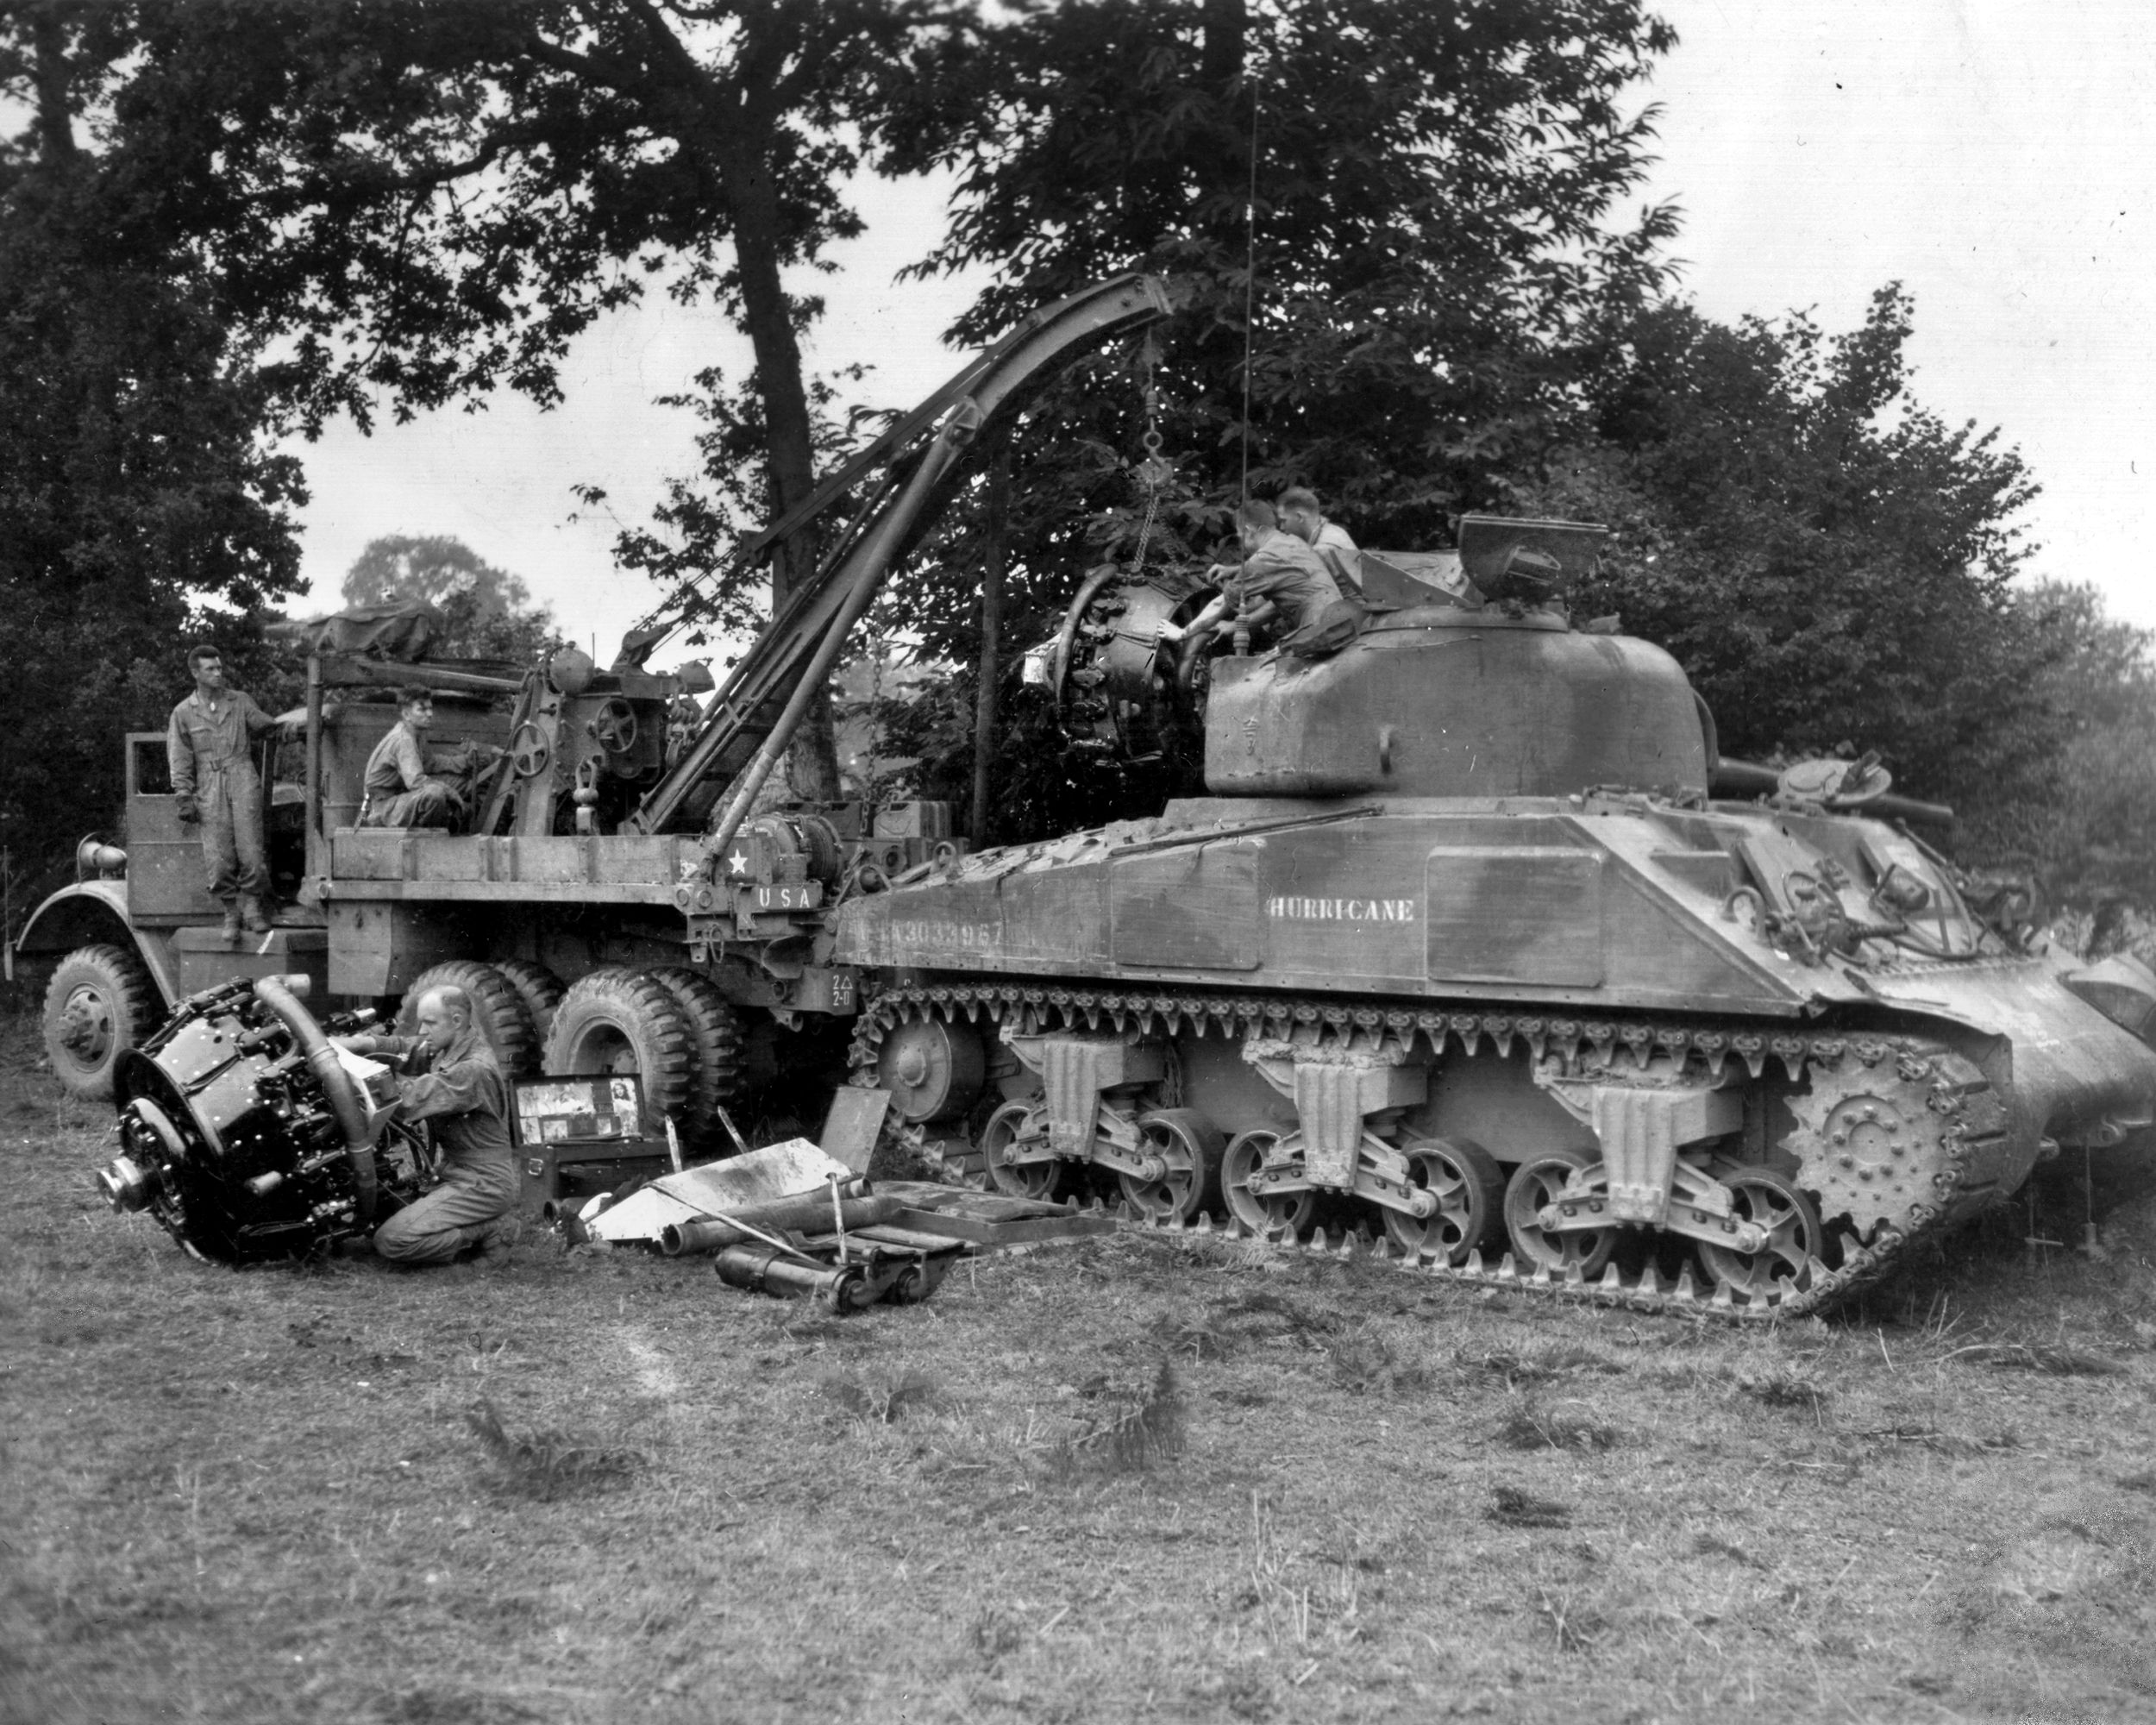 Using a Federal C-2 wrecker, a maintenance crew installs a new radial airplane engine in a 2nd Armored Division Sherman tank named “Hurricane” near the front lines at Le Teilleul, France, east of Avranches, July 1944.